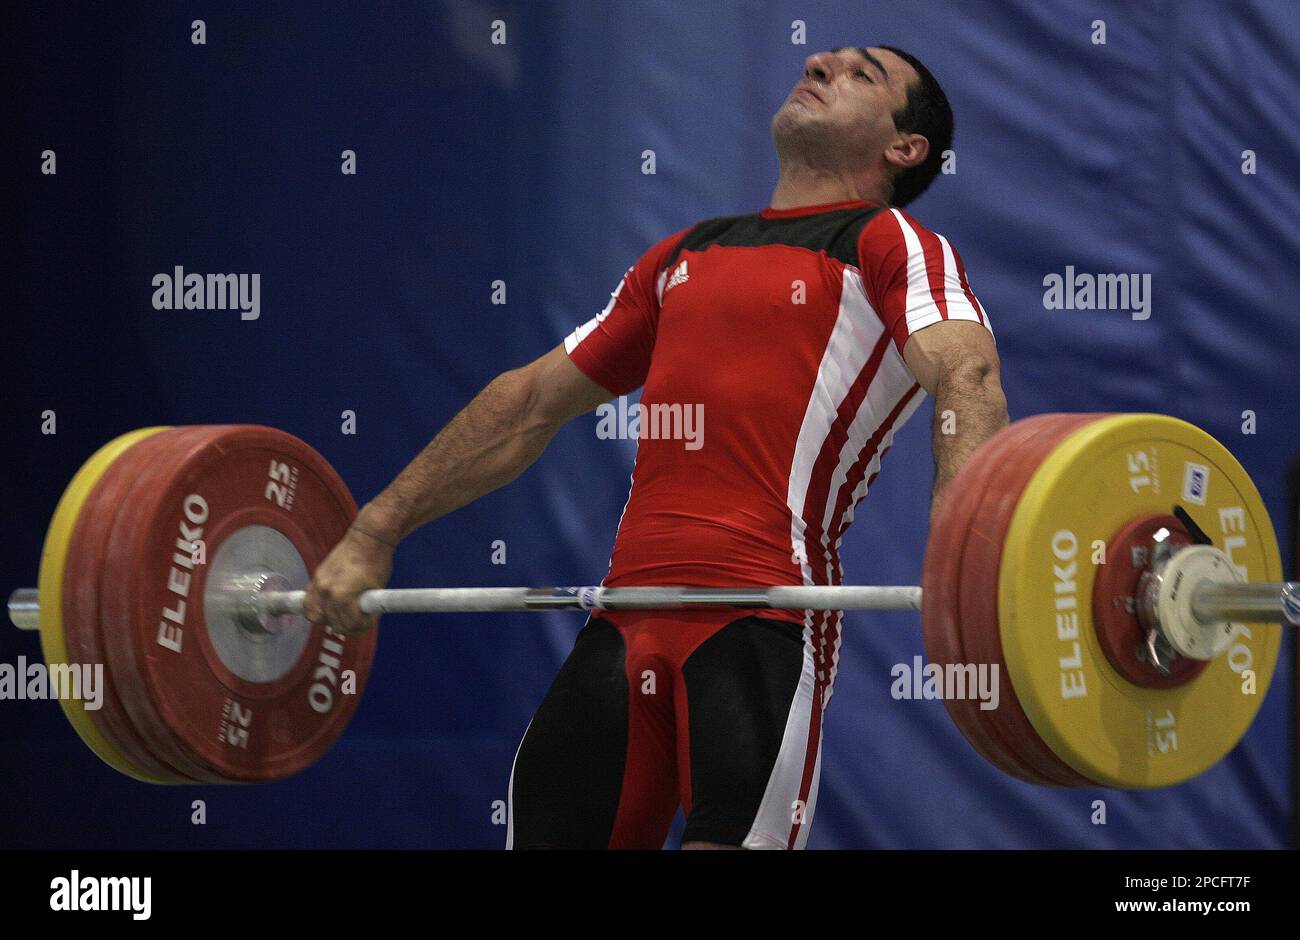 Armenia's Khachatryan Ara lifts 165 kgs (364 lbs) to win the bronze medal  in snatch modality of the men's 77 kgs (170 lbs) category at the World  Weightlifting Championships in Santo Domingo,